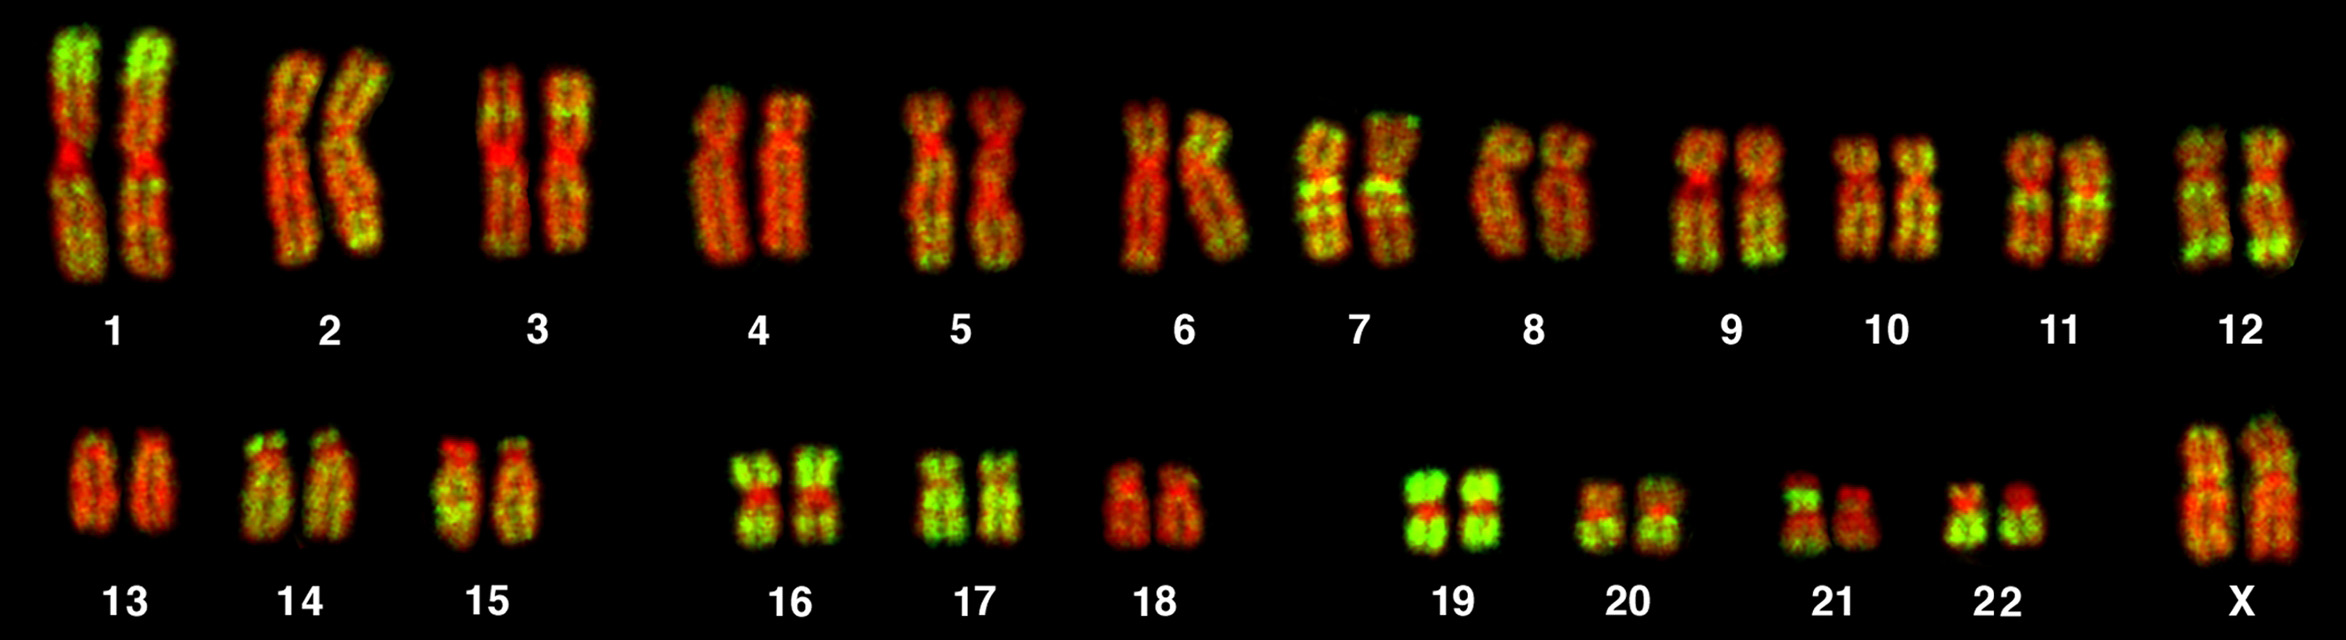 Most of the content of our chromosomes may simply function as a protective mechanisms against rogue mutations. Credit: Andreas Bolzer, Gregor Kreth, Irina Solovei, Daniela Koehler, Kaan Saracoglu, Christine Fauth, Stefan Müller, Roland Eils, Christoph Cremer, Michael R. Speicher, Thomas Cremer, via Wikimedia Commons